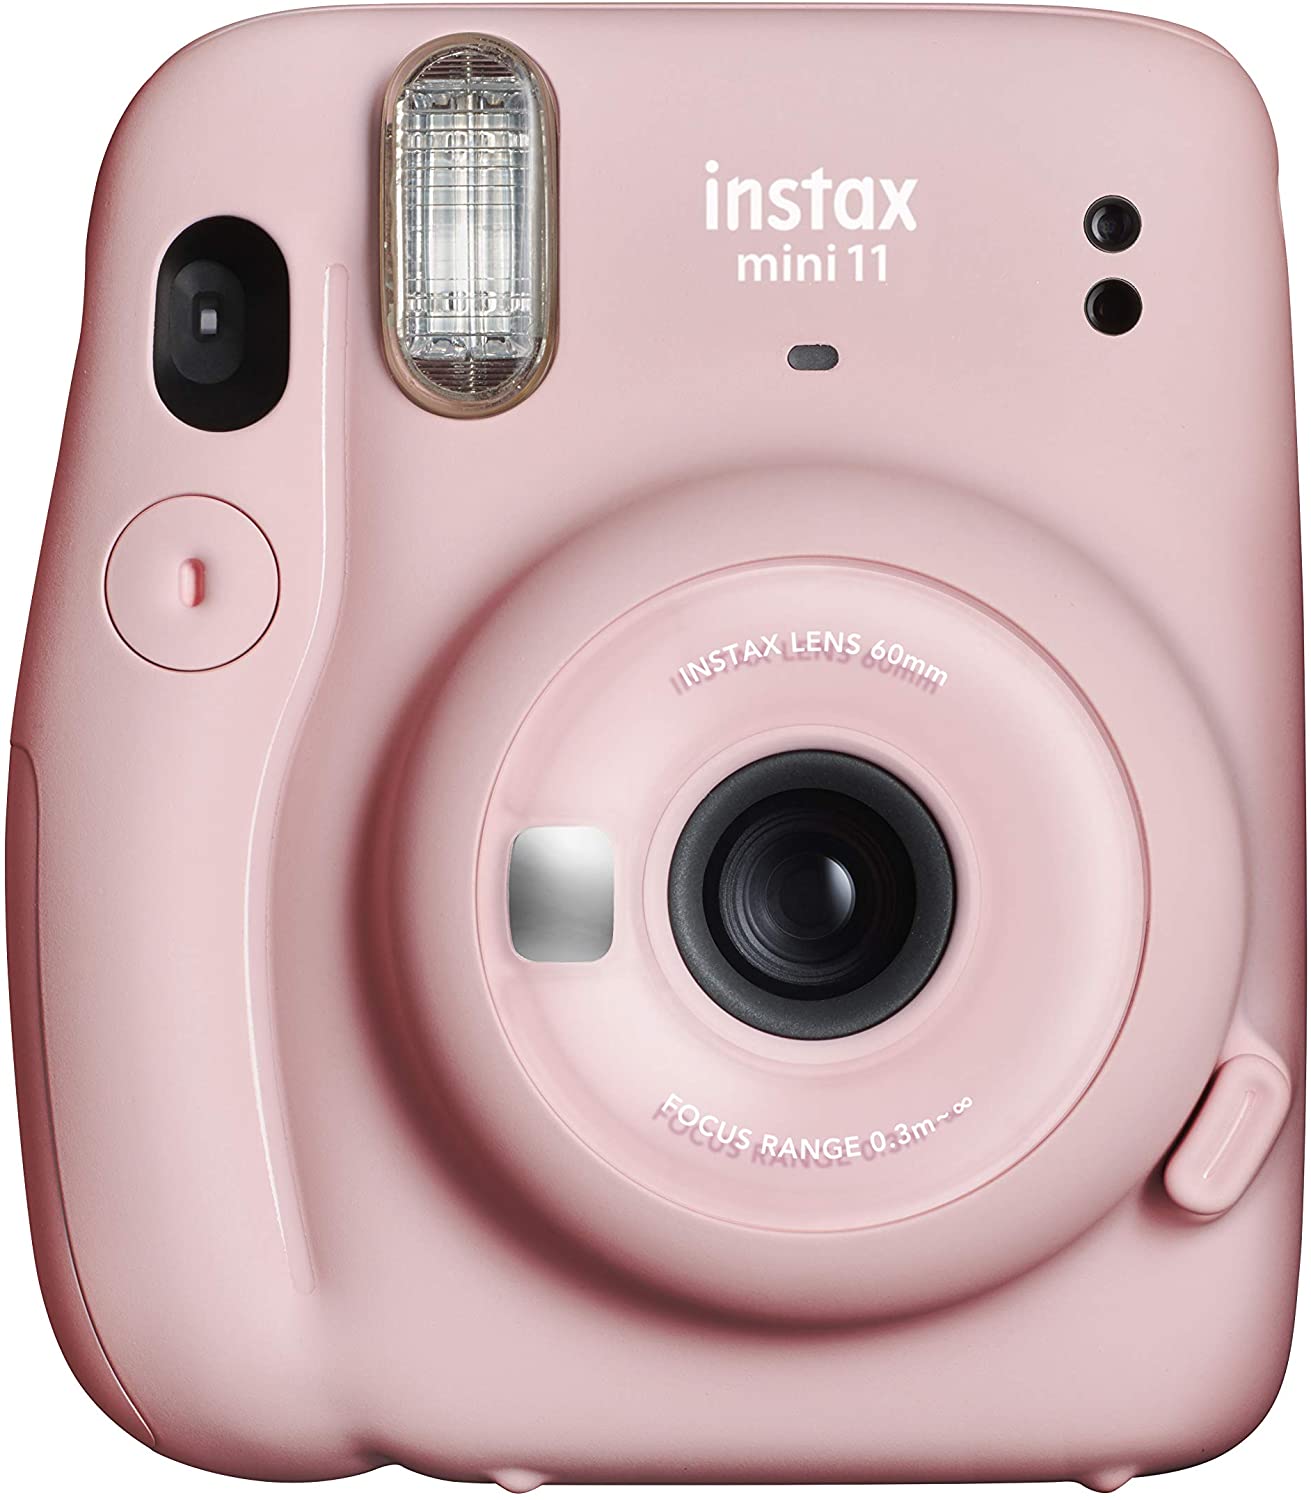 Fujifilm Instax Mini 11 Blush Pink Camera with Fuji Instant Film Twin Pack (20 Pictures) + Pink  Case, Album, Stickers, and More Accessories Bundle - image 5 of 5